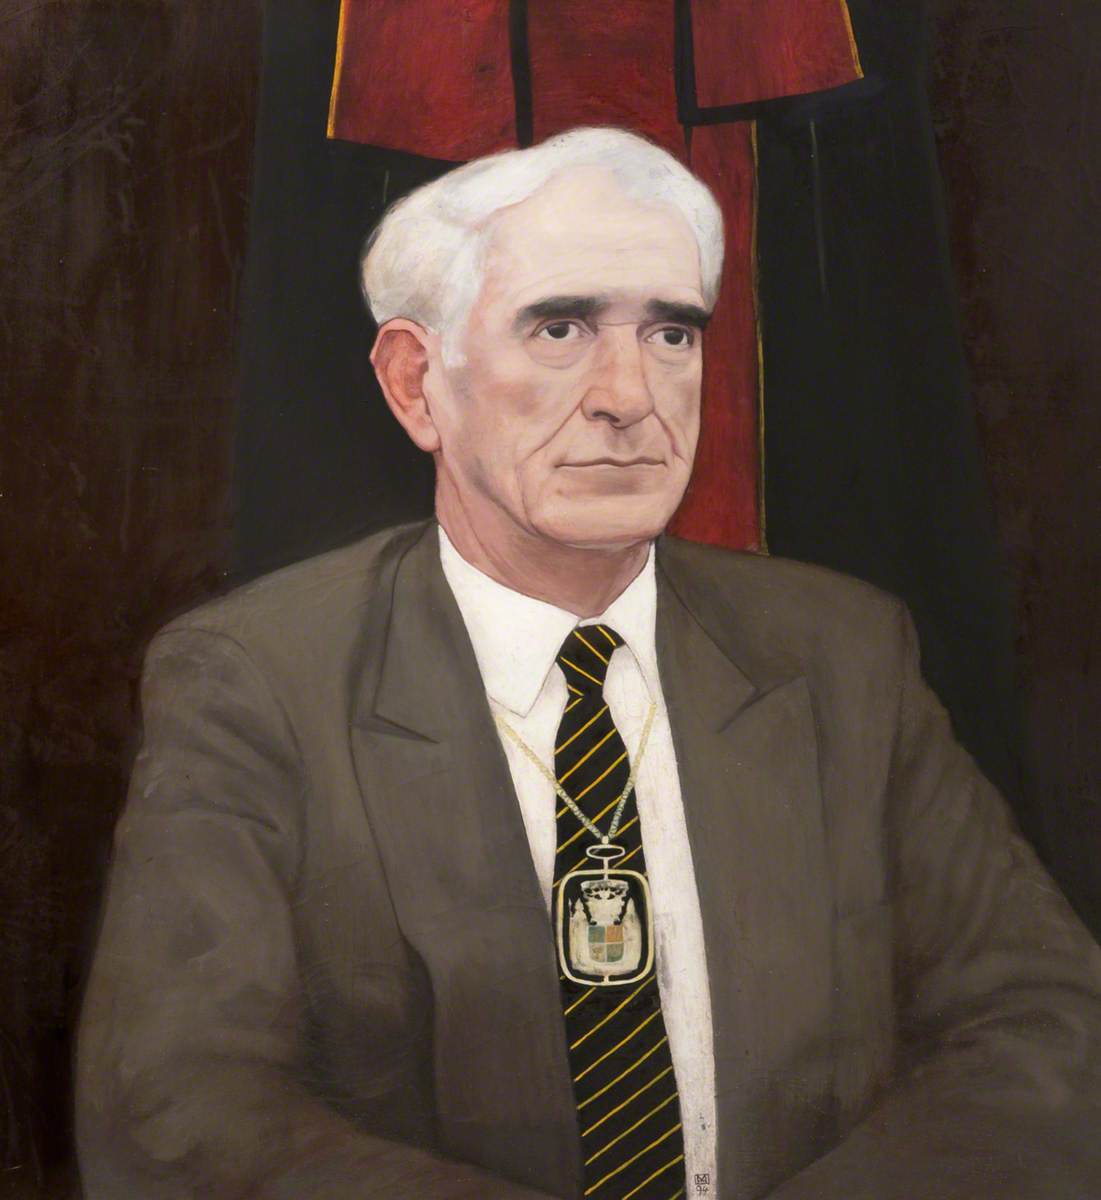 Sir Donald Campbell, President of the Royal College of Physicians and Surgeons of Glasgow (1992–1994)